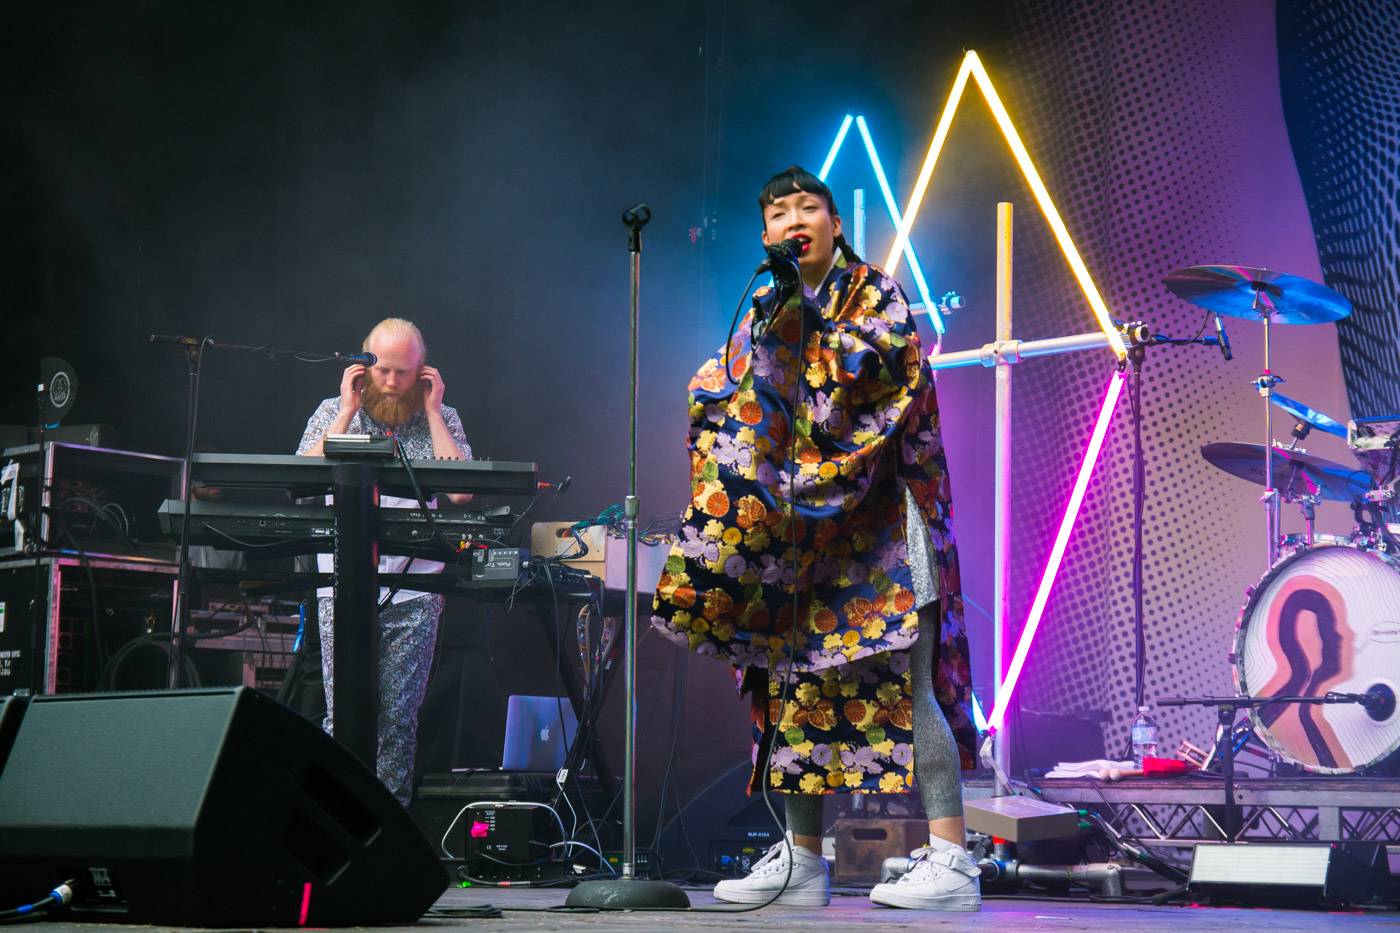 Little Dragon at the Malkin Bowl, Vancouver, May 23 2015. Pavel Boiko photo.